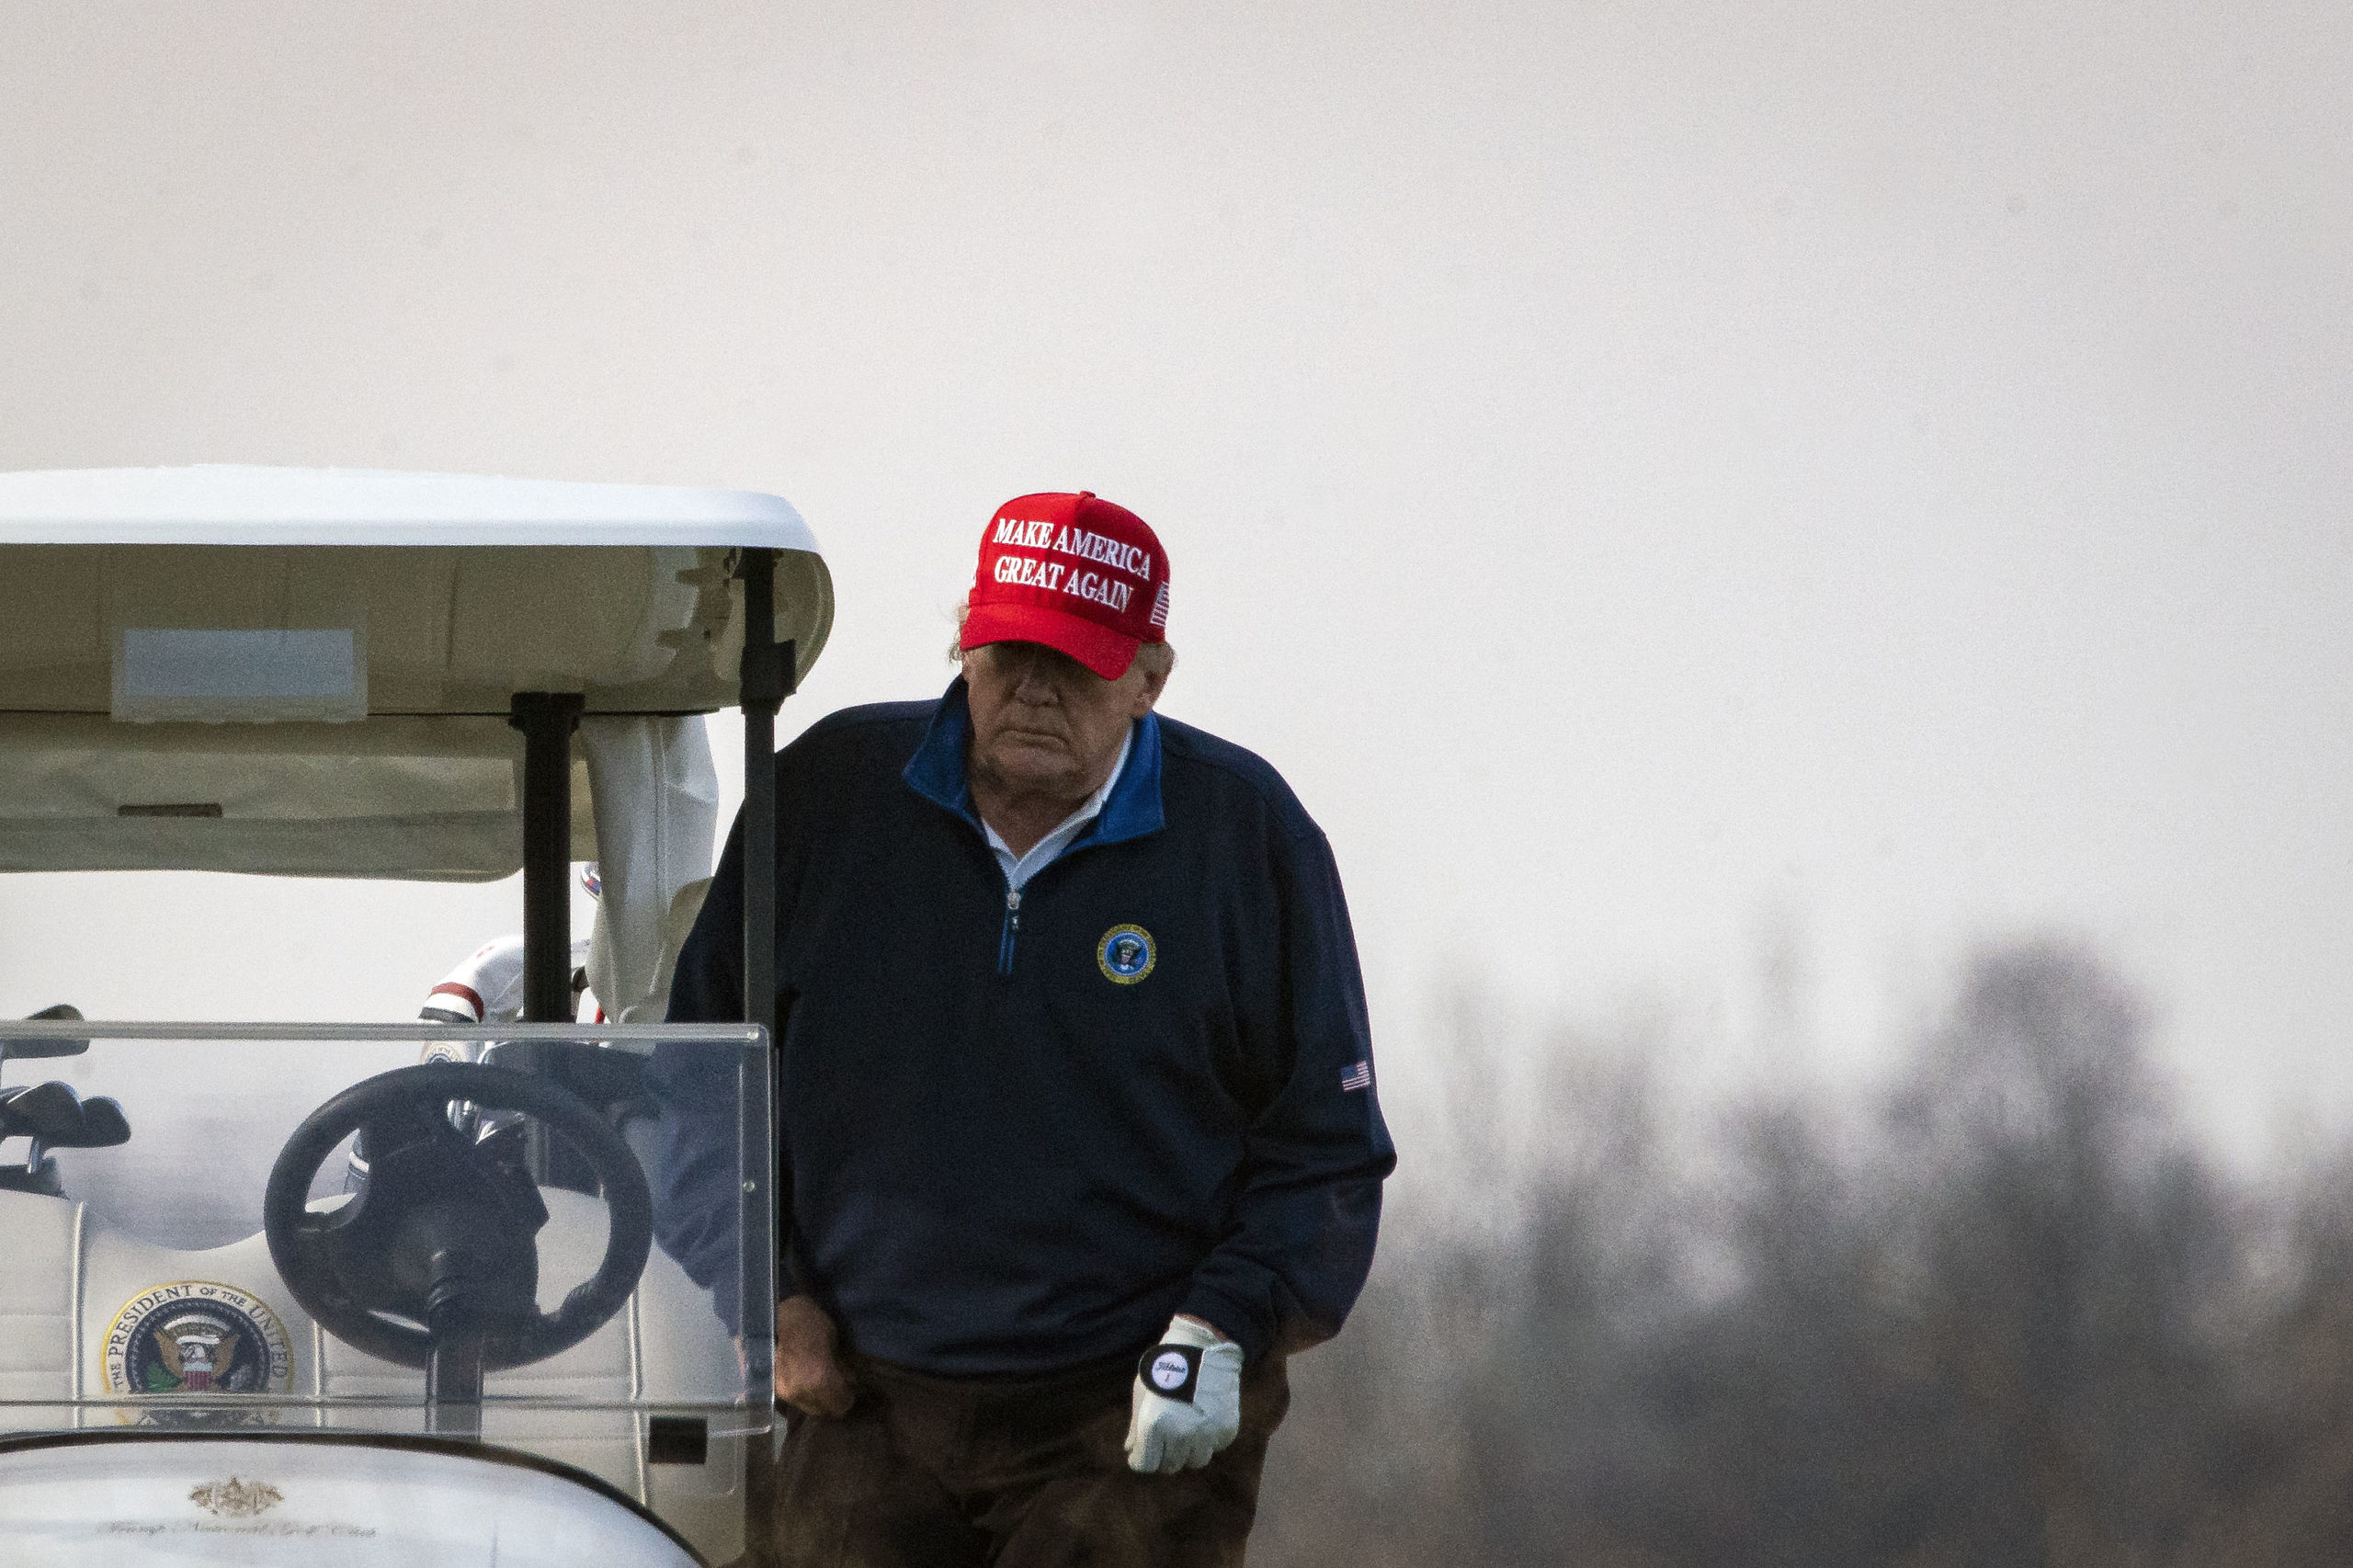 STERLING, VA - DECEMBER 13: U.S. President Donald Trump climbs into golf cart number 45 as he golfs at Trump National Golf Club on December 13, 2020 in Sterling, Virginia. (Photo by Al Drago/Getty Images)